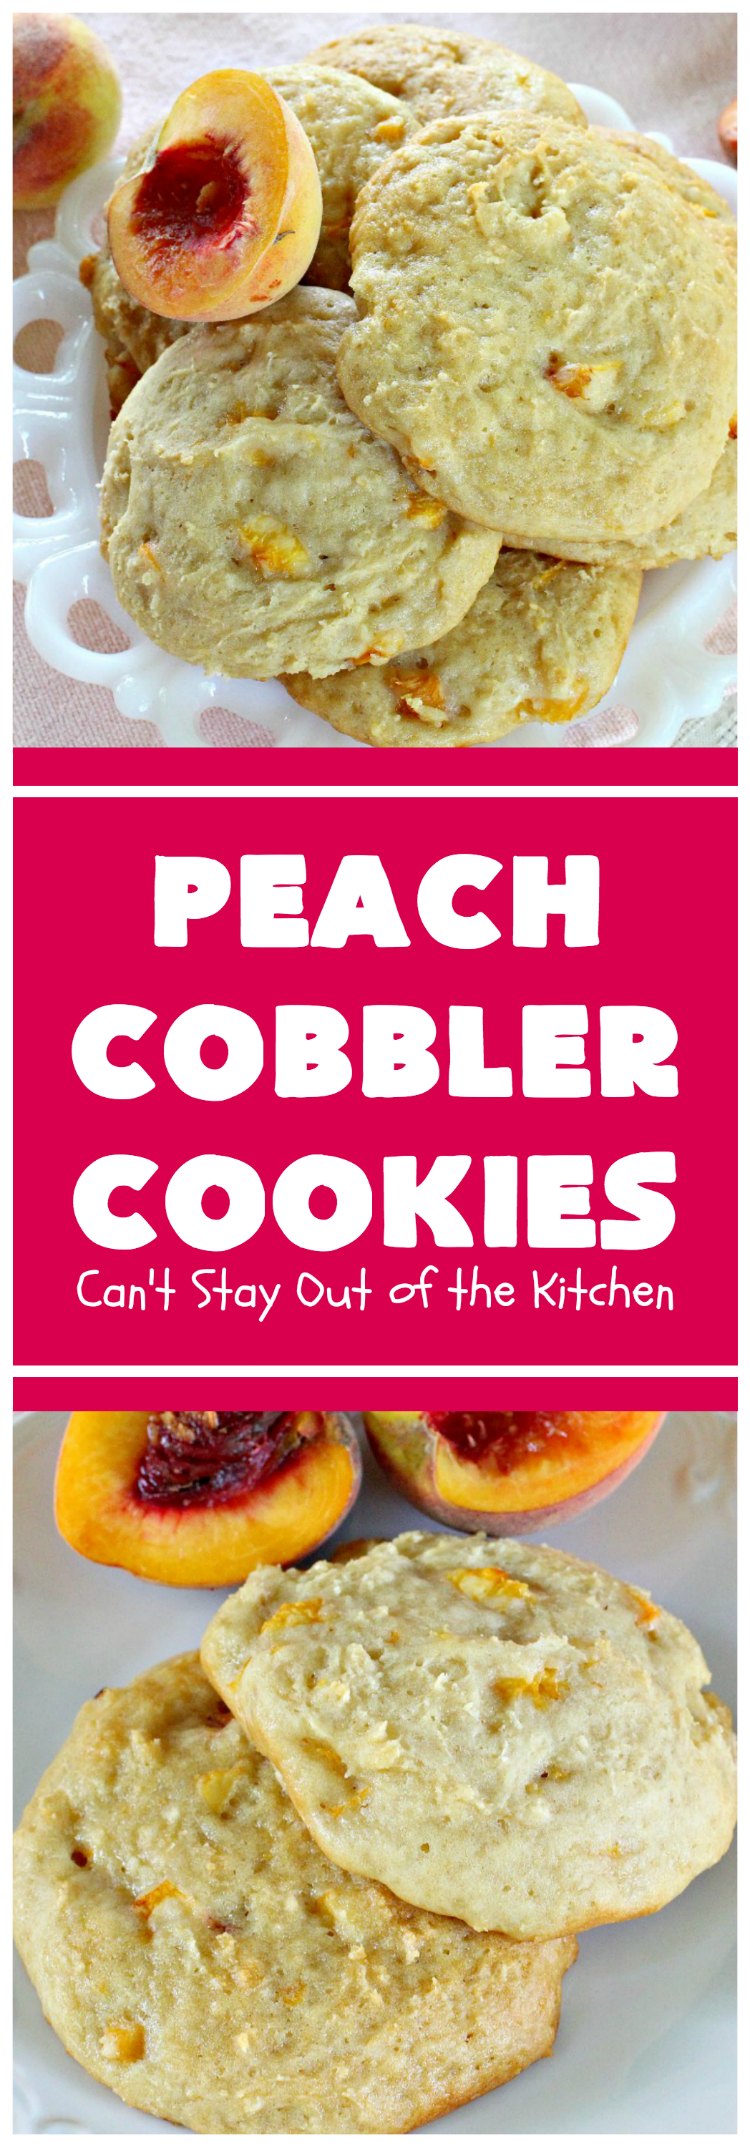 Peach Cobbler Cookies | Can't Stay Out of the Kitchen